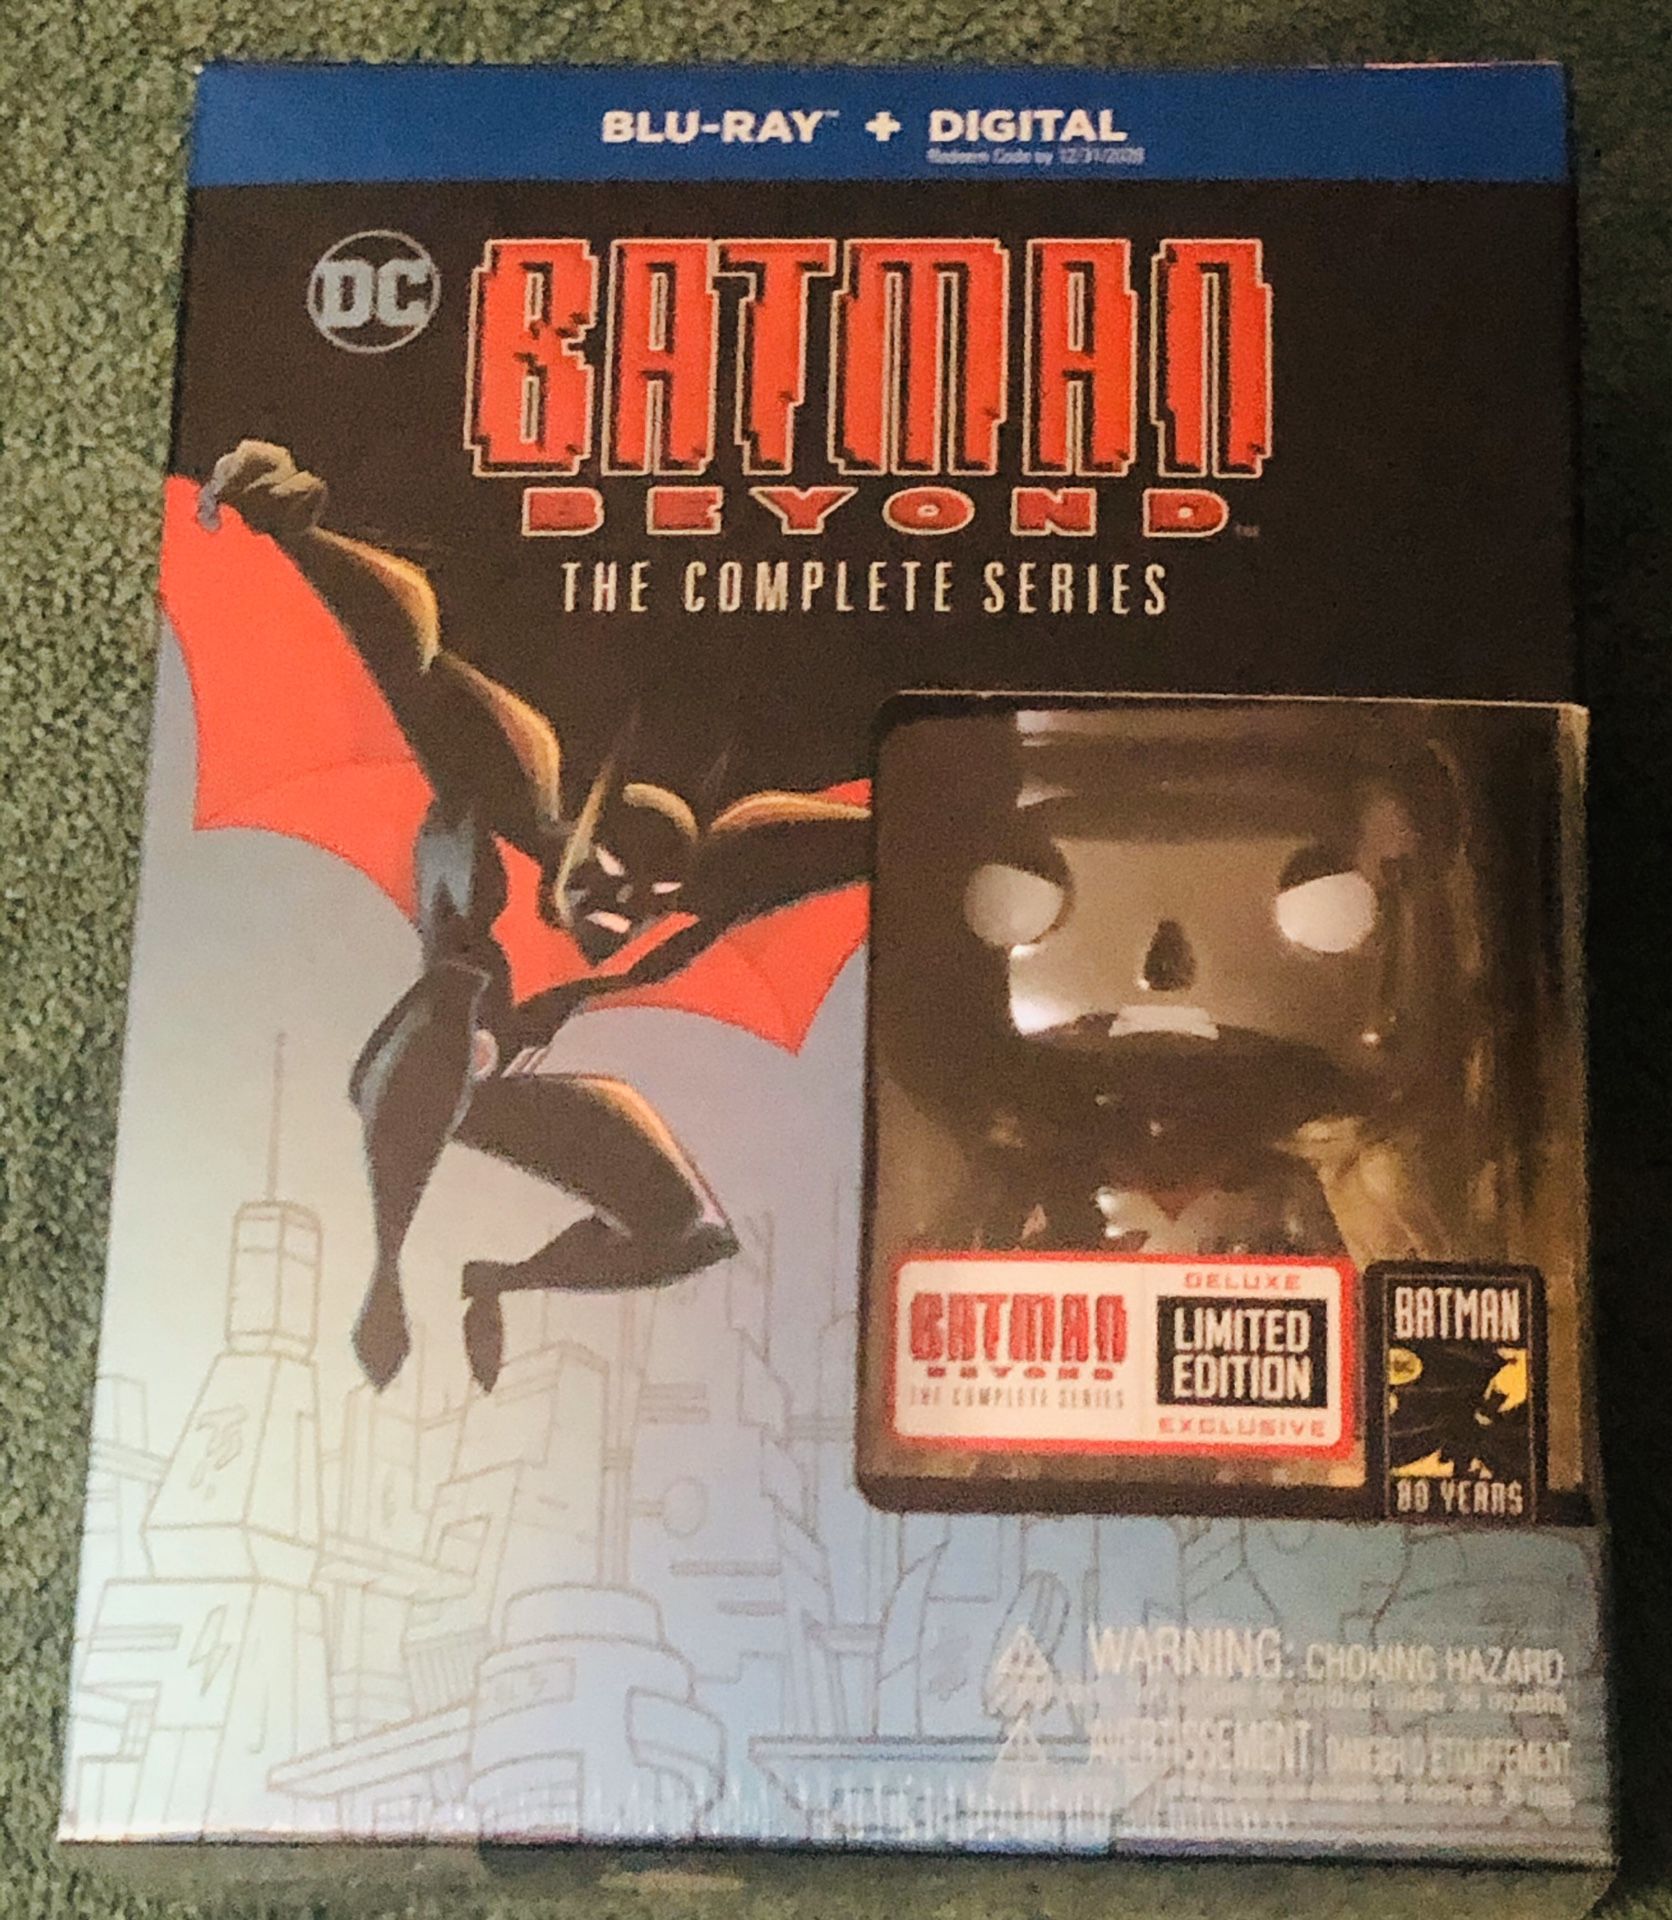 BATMAN BEYOND THE COMPLETE SERIES BLU-RAY SEALED LIMITED EDITION FUNKO POP